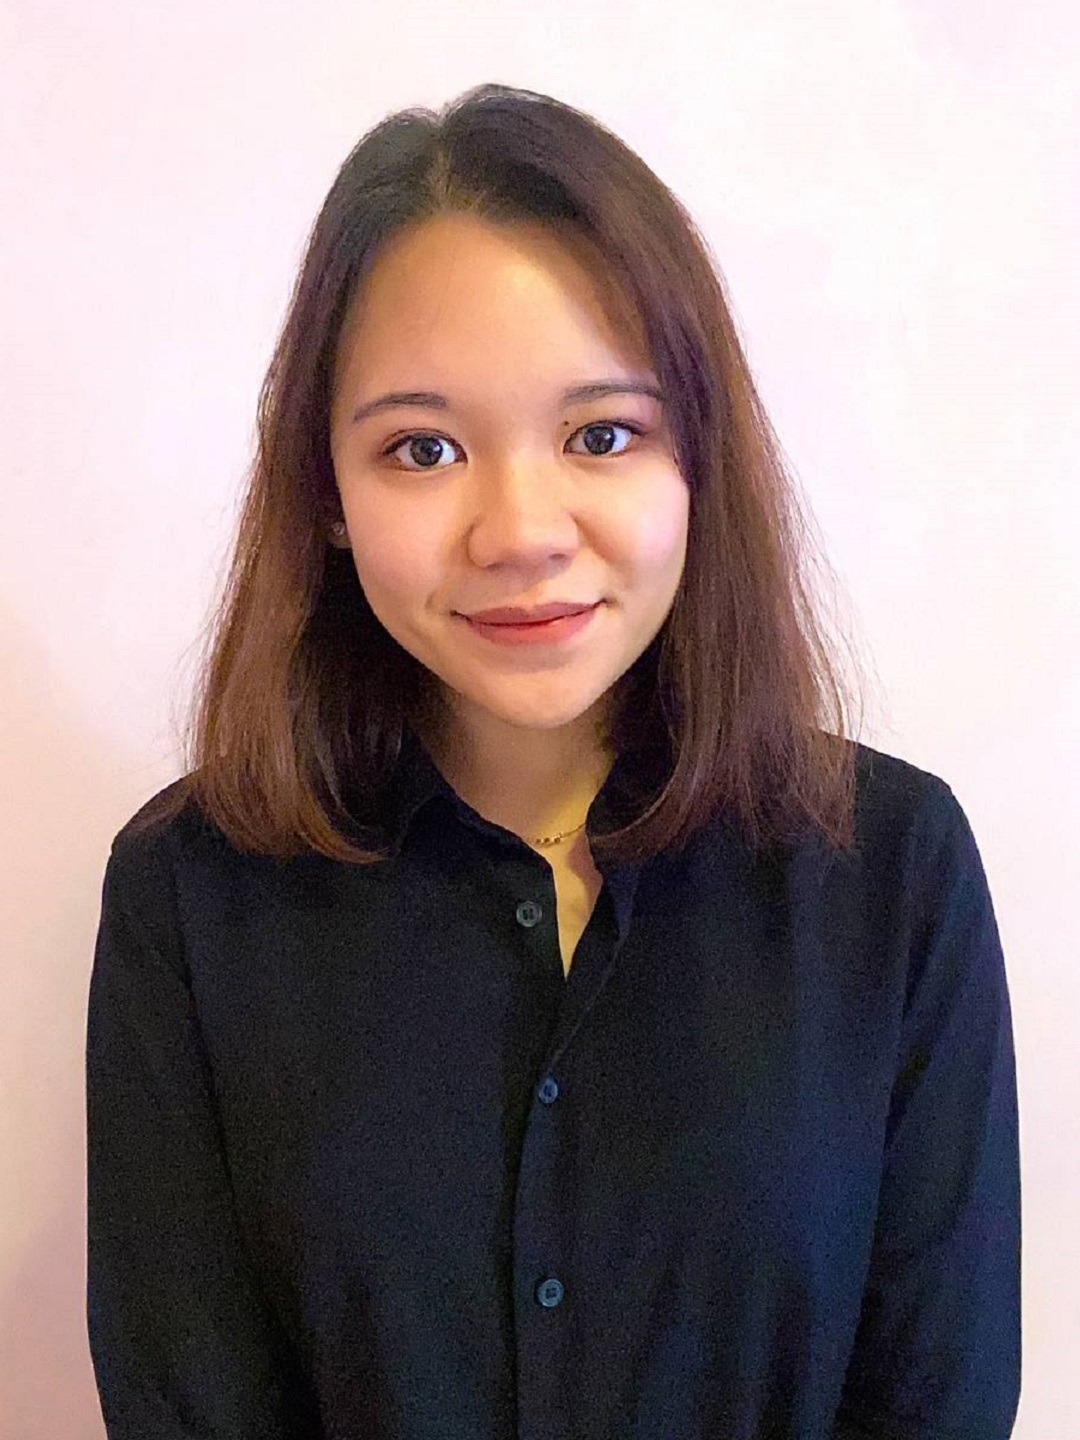 “I stepped foot in Curtin Malaysia for the first time in 2017 to pursue the Foundation in Commerce. It was my first time being in a different state alone. It took a lot of courage for me to be away from family and enter a strange new environment....